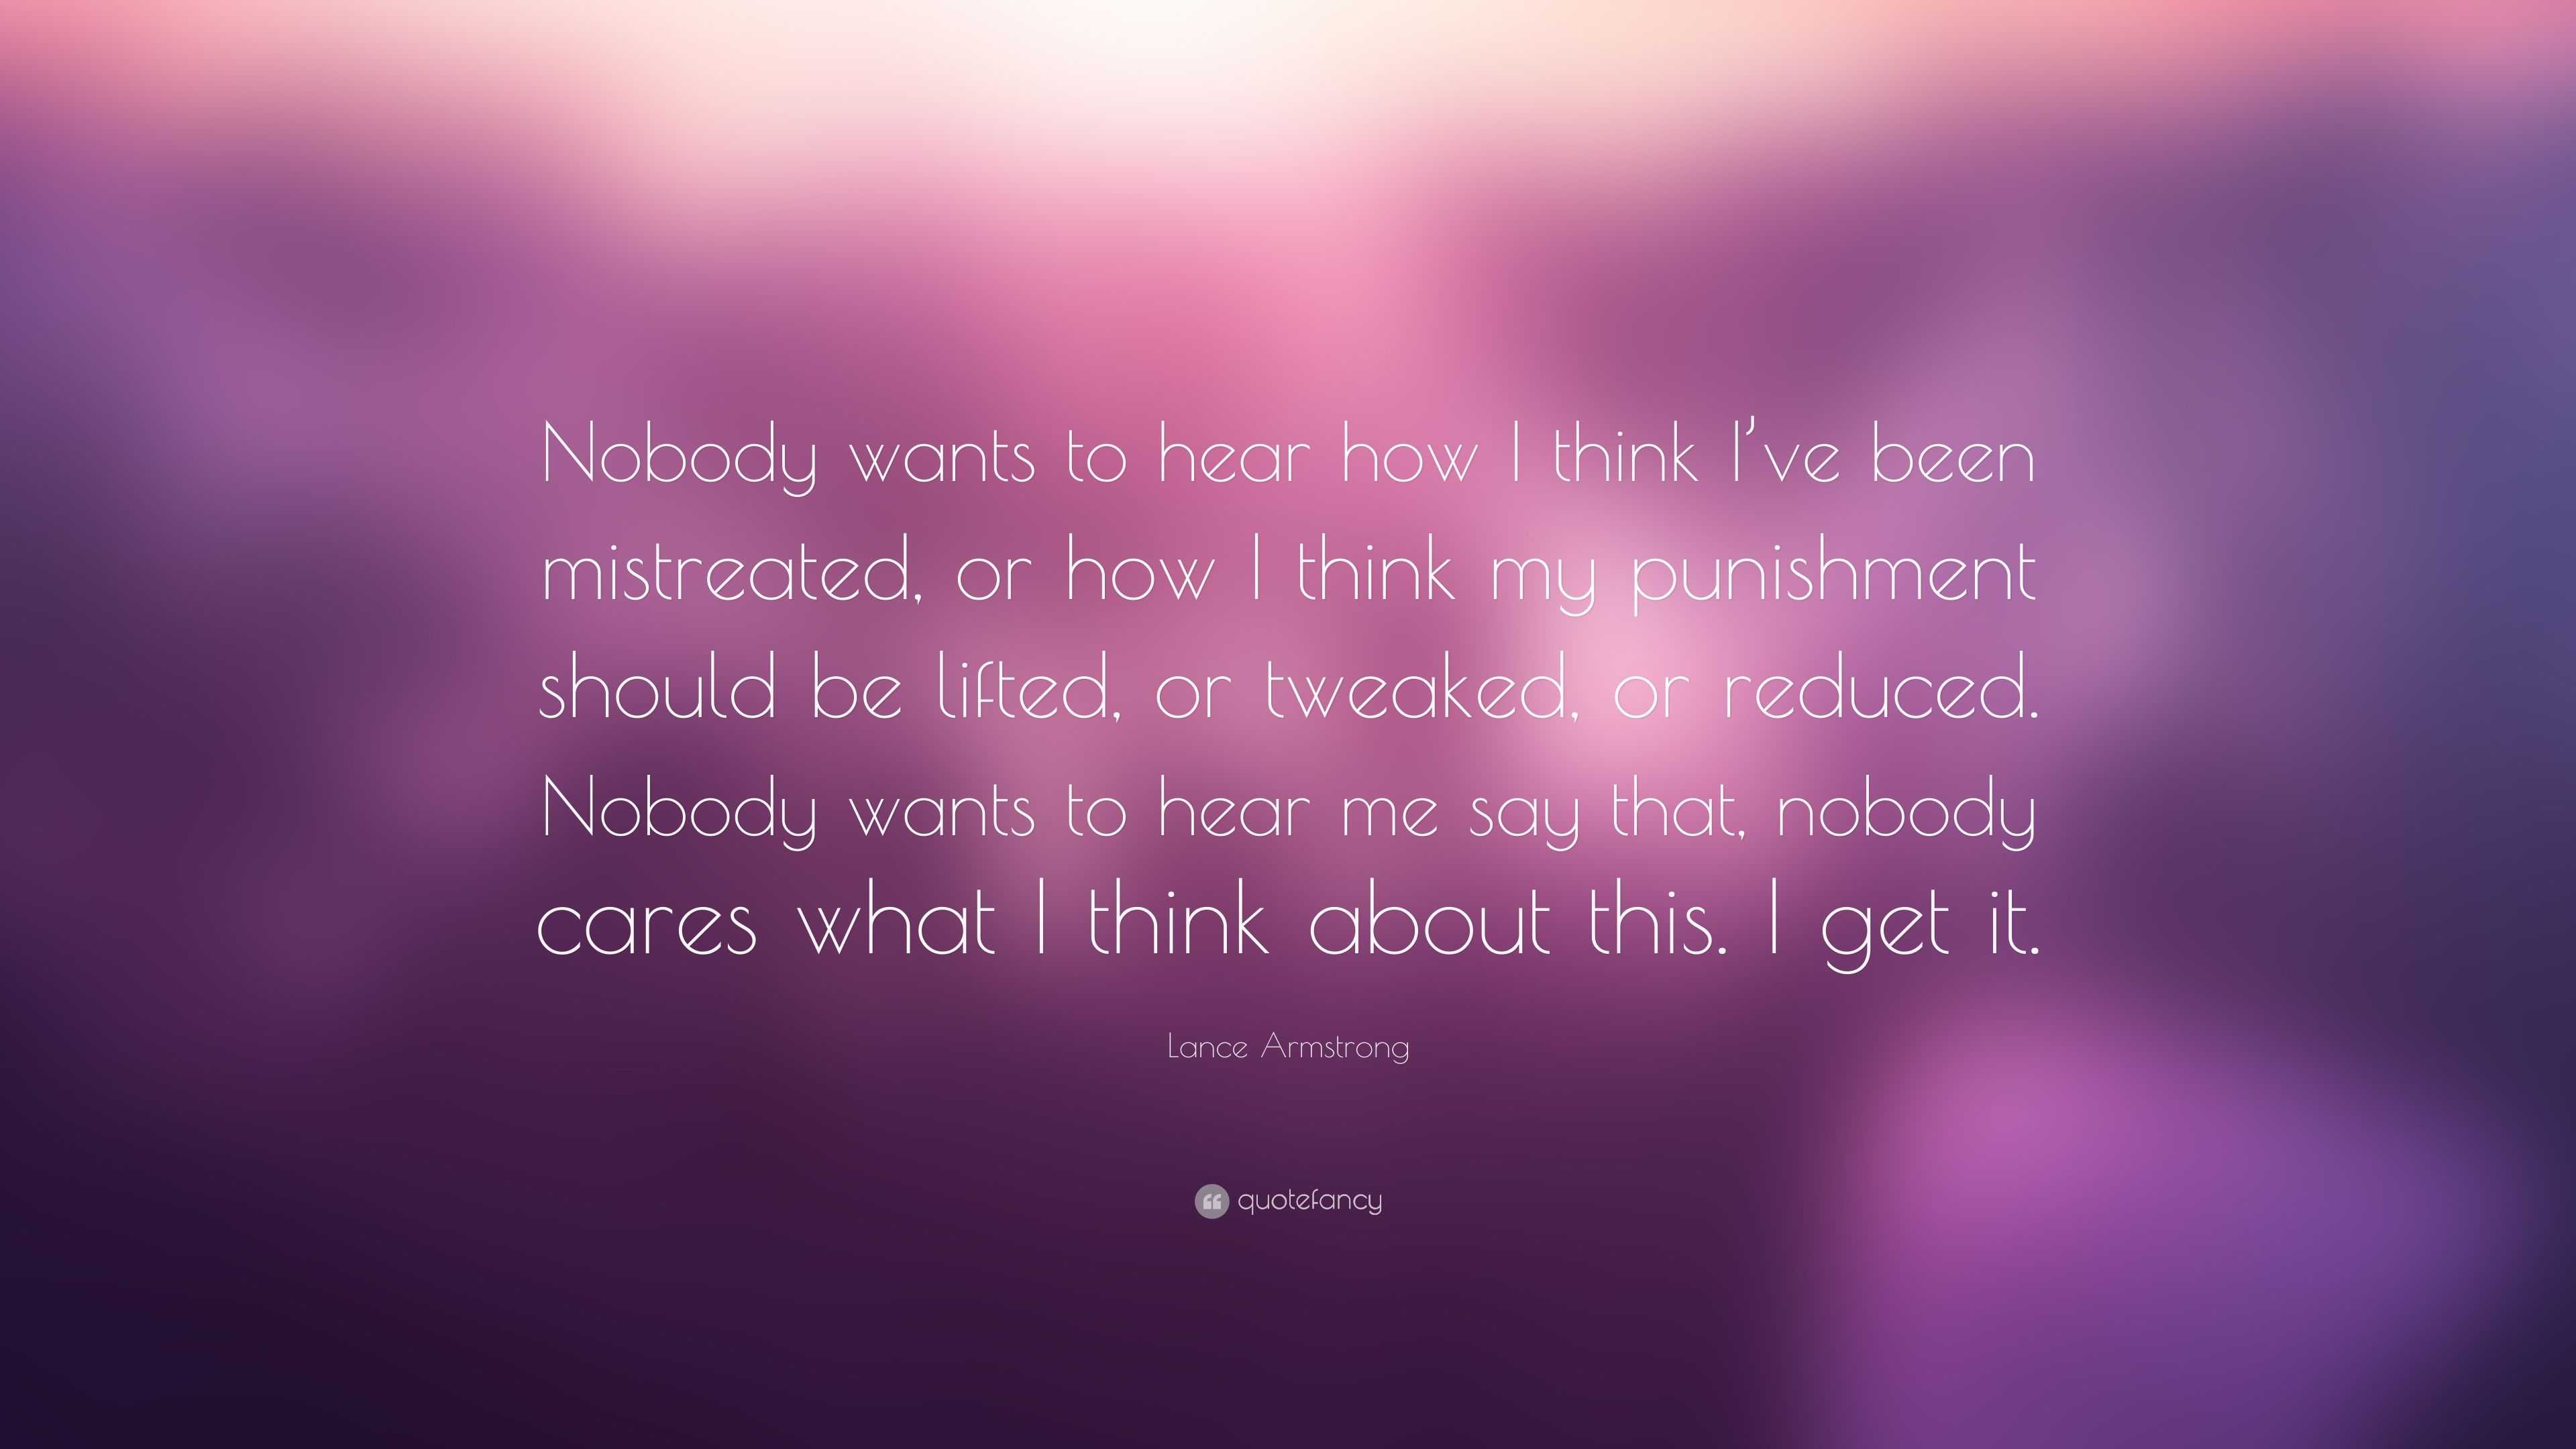 Lance Armstrong Quote: “Nobody wants to hear how I think I’ve been ...